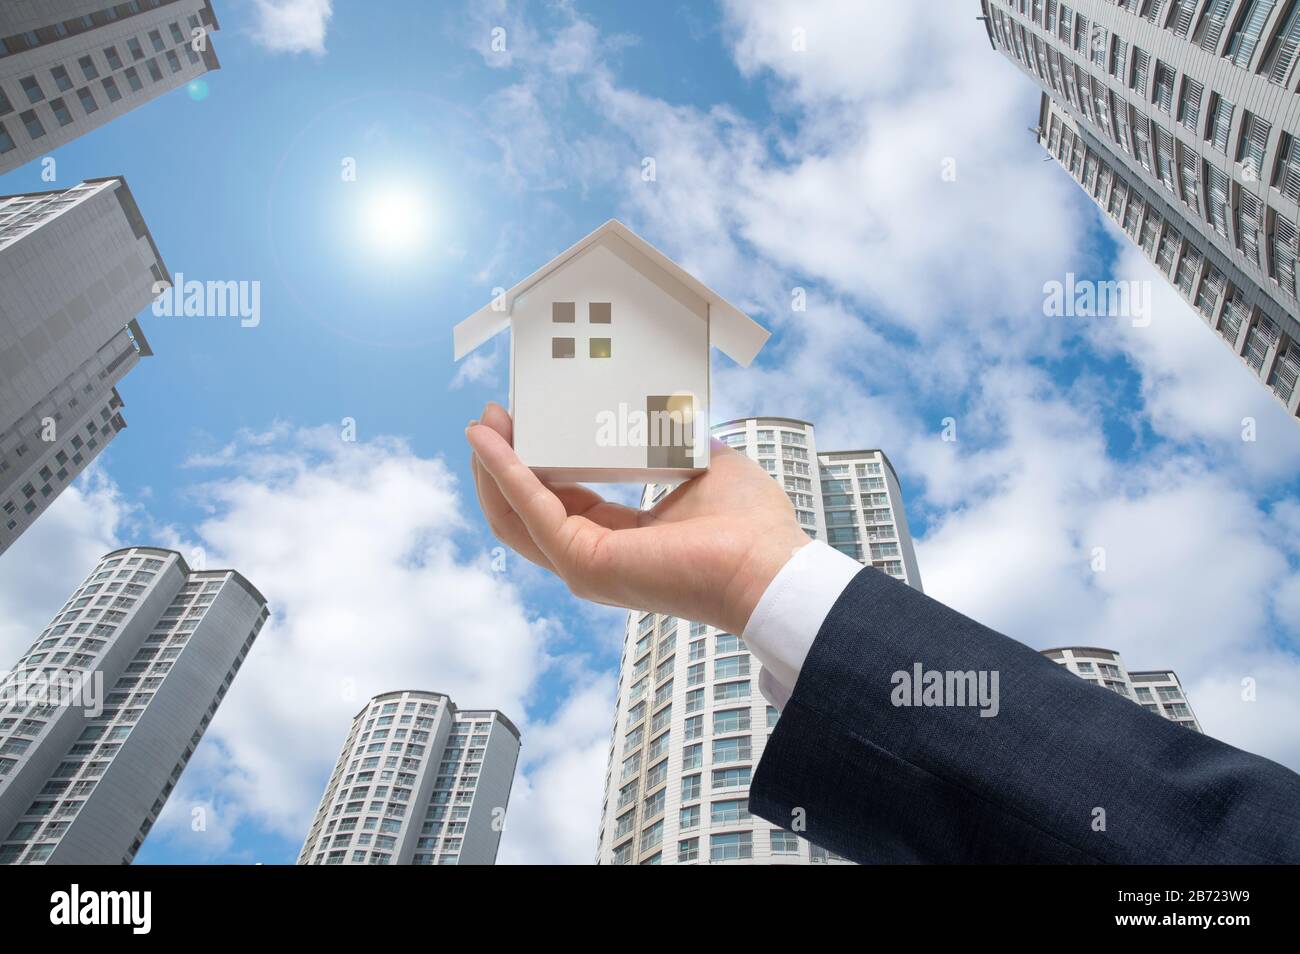 Businessman with house model on hand. Real estate concept Stock Photo